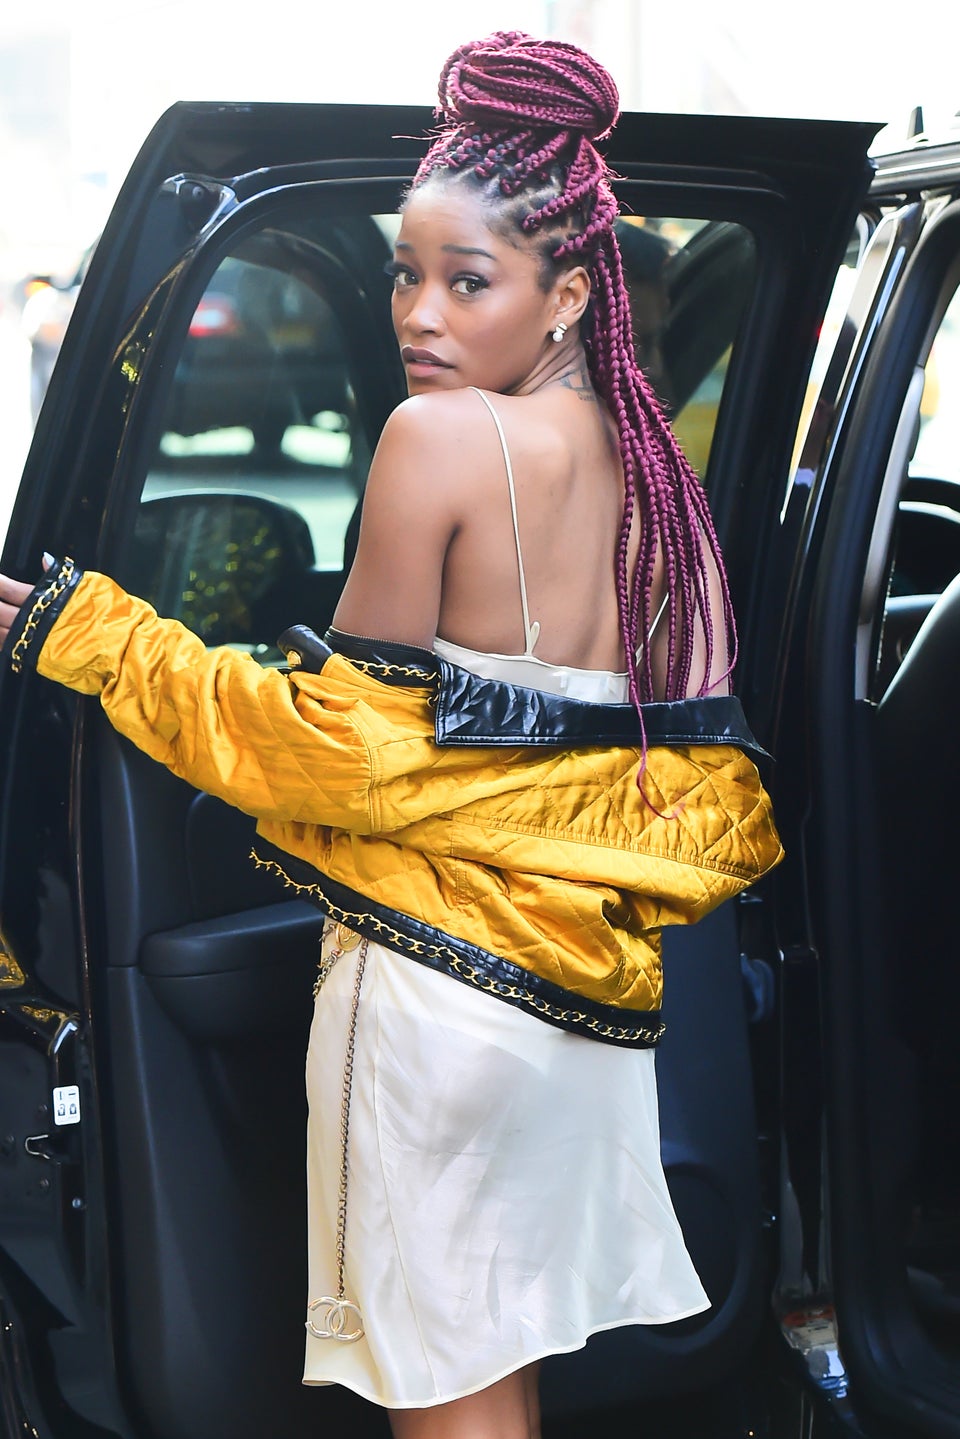 Keke Palmer Is Every Girl After She Leaves The Salon In This Video